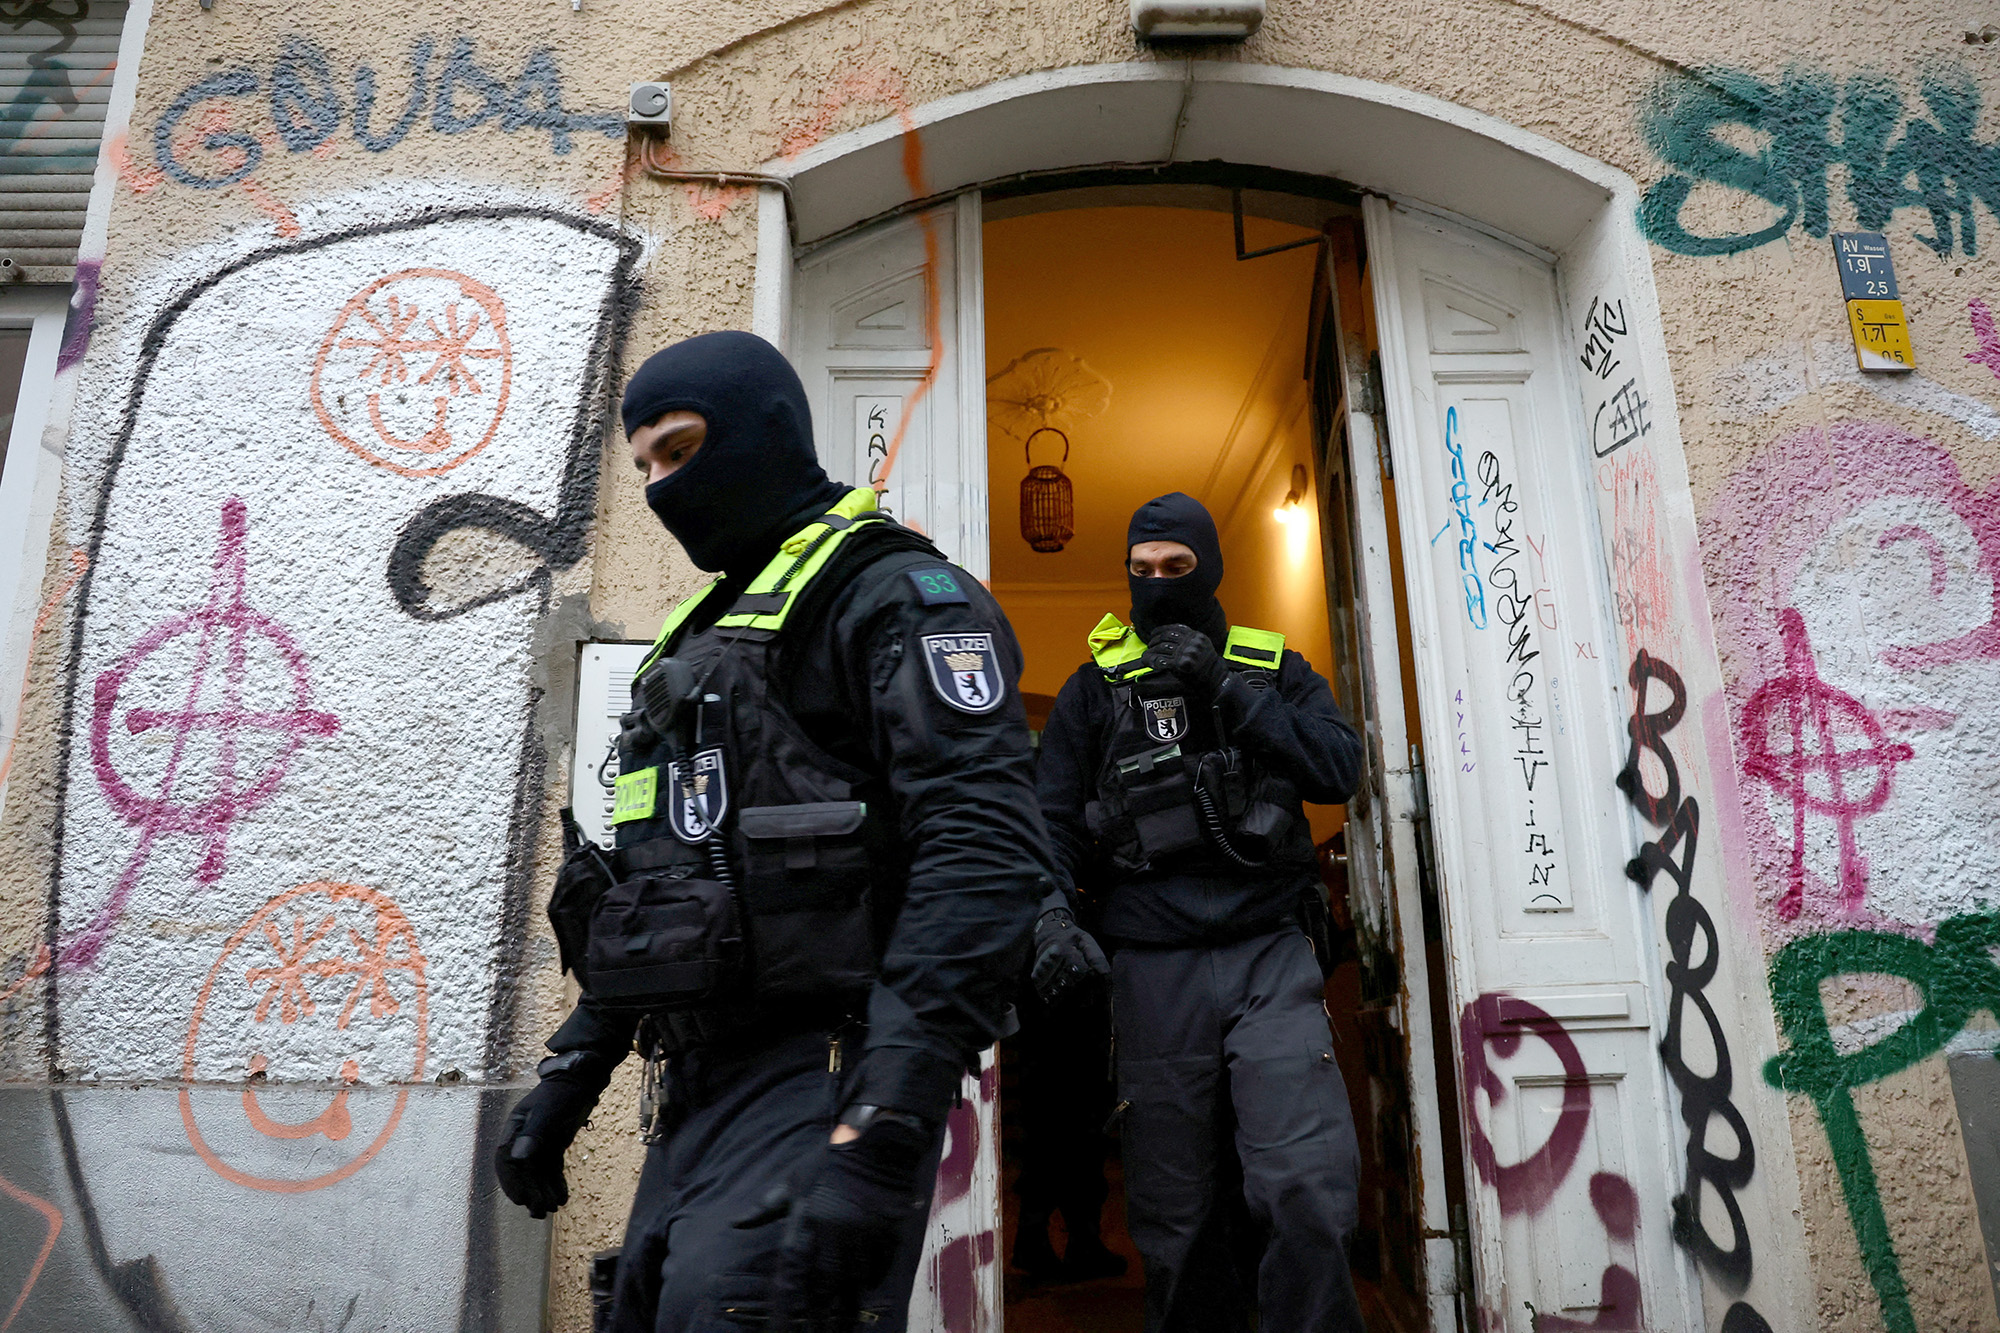 German police officers leave a house during a raid against people supporting Hamas, in Berlin, Germany, on November 23.